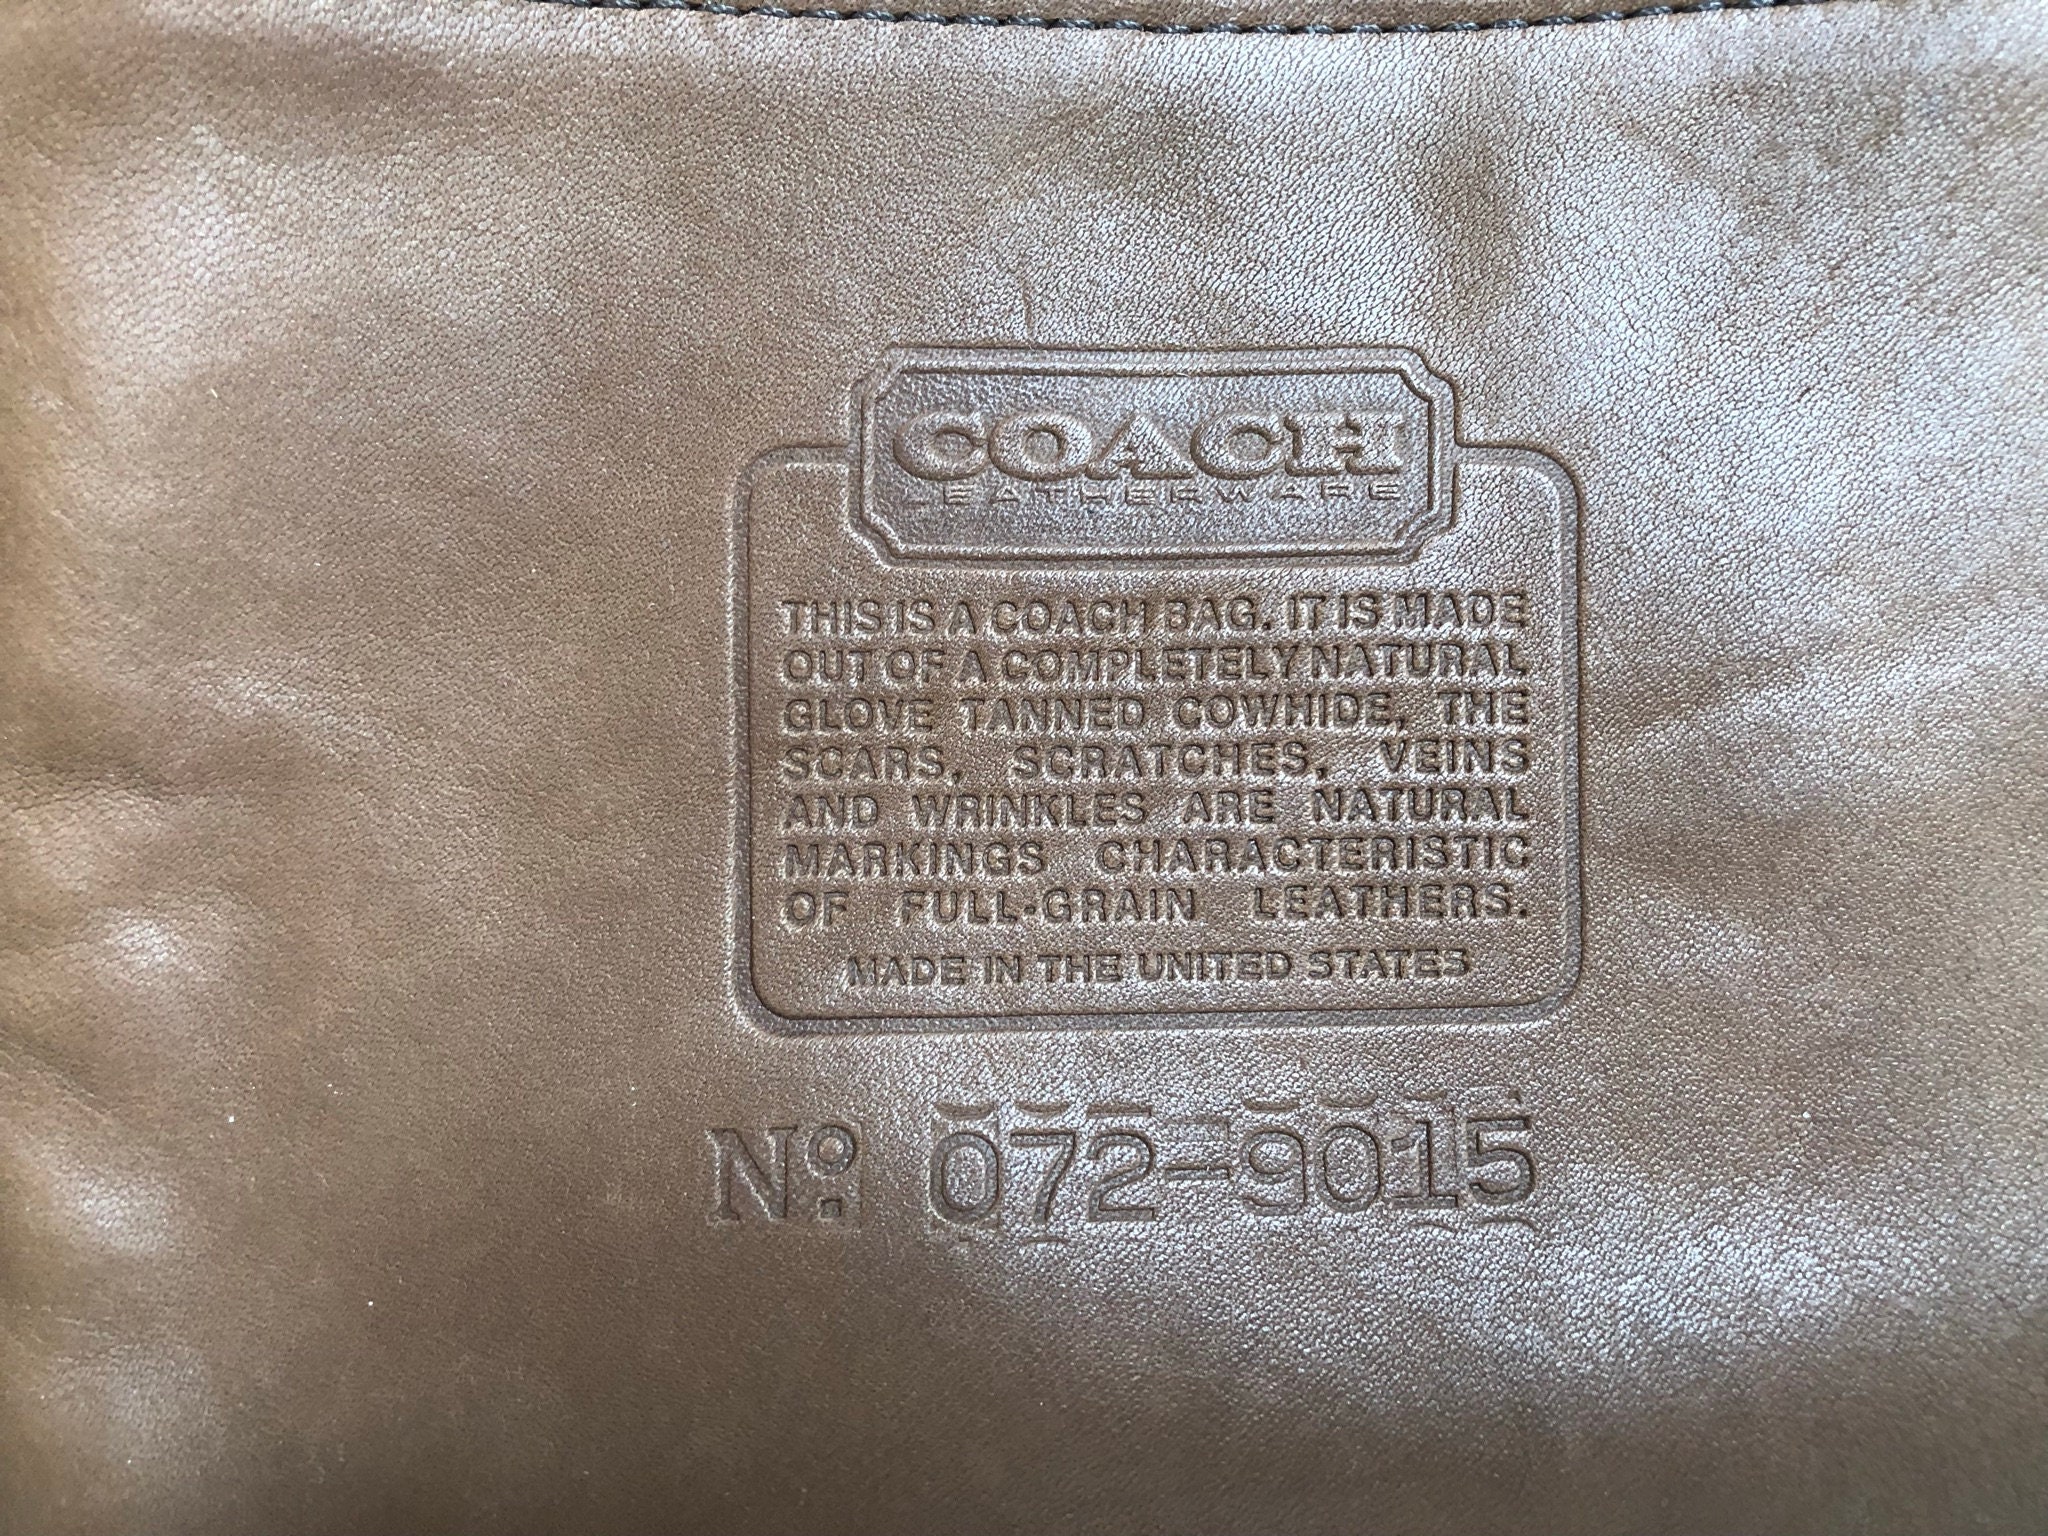 Coach, Bags, Coach Authentic Leather Speedy Style Bag